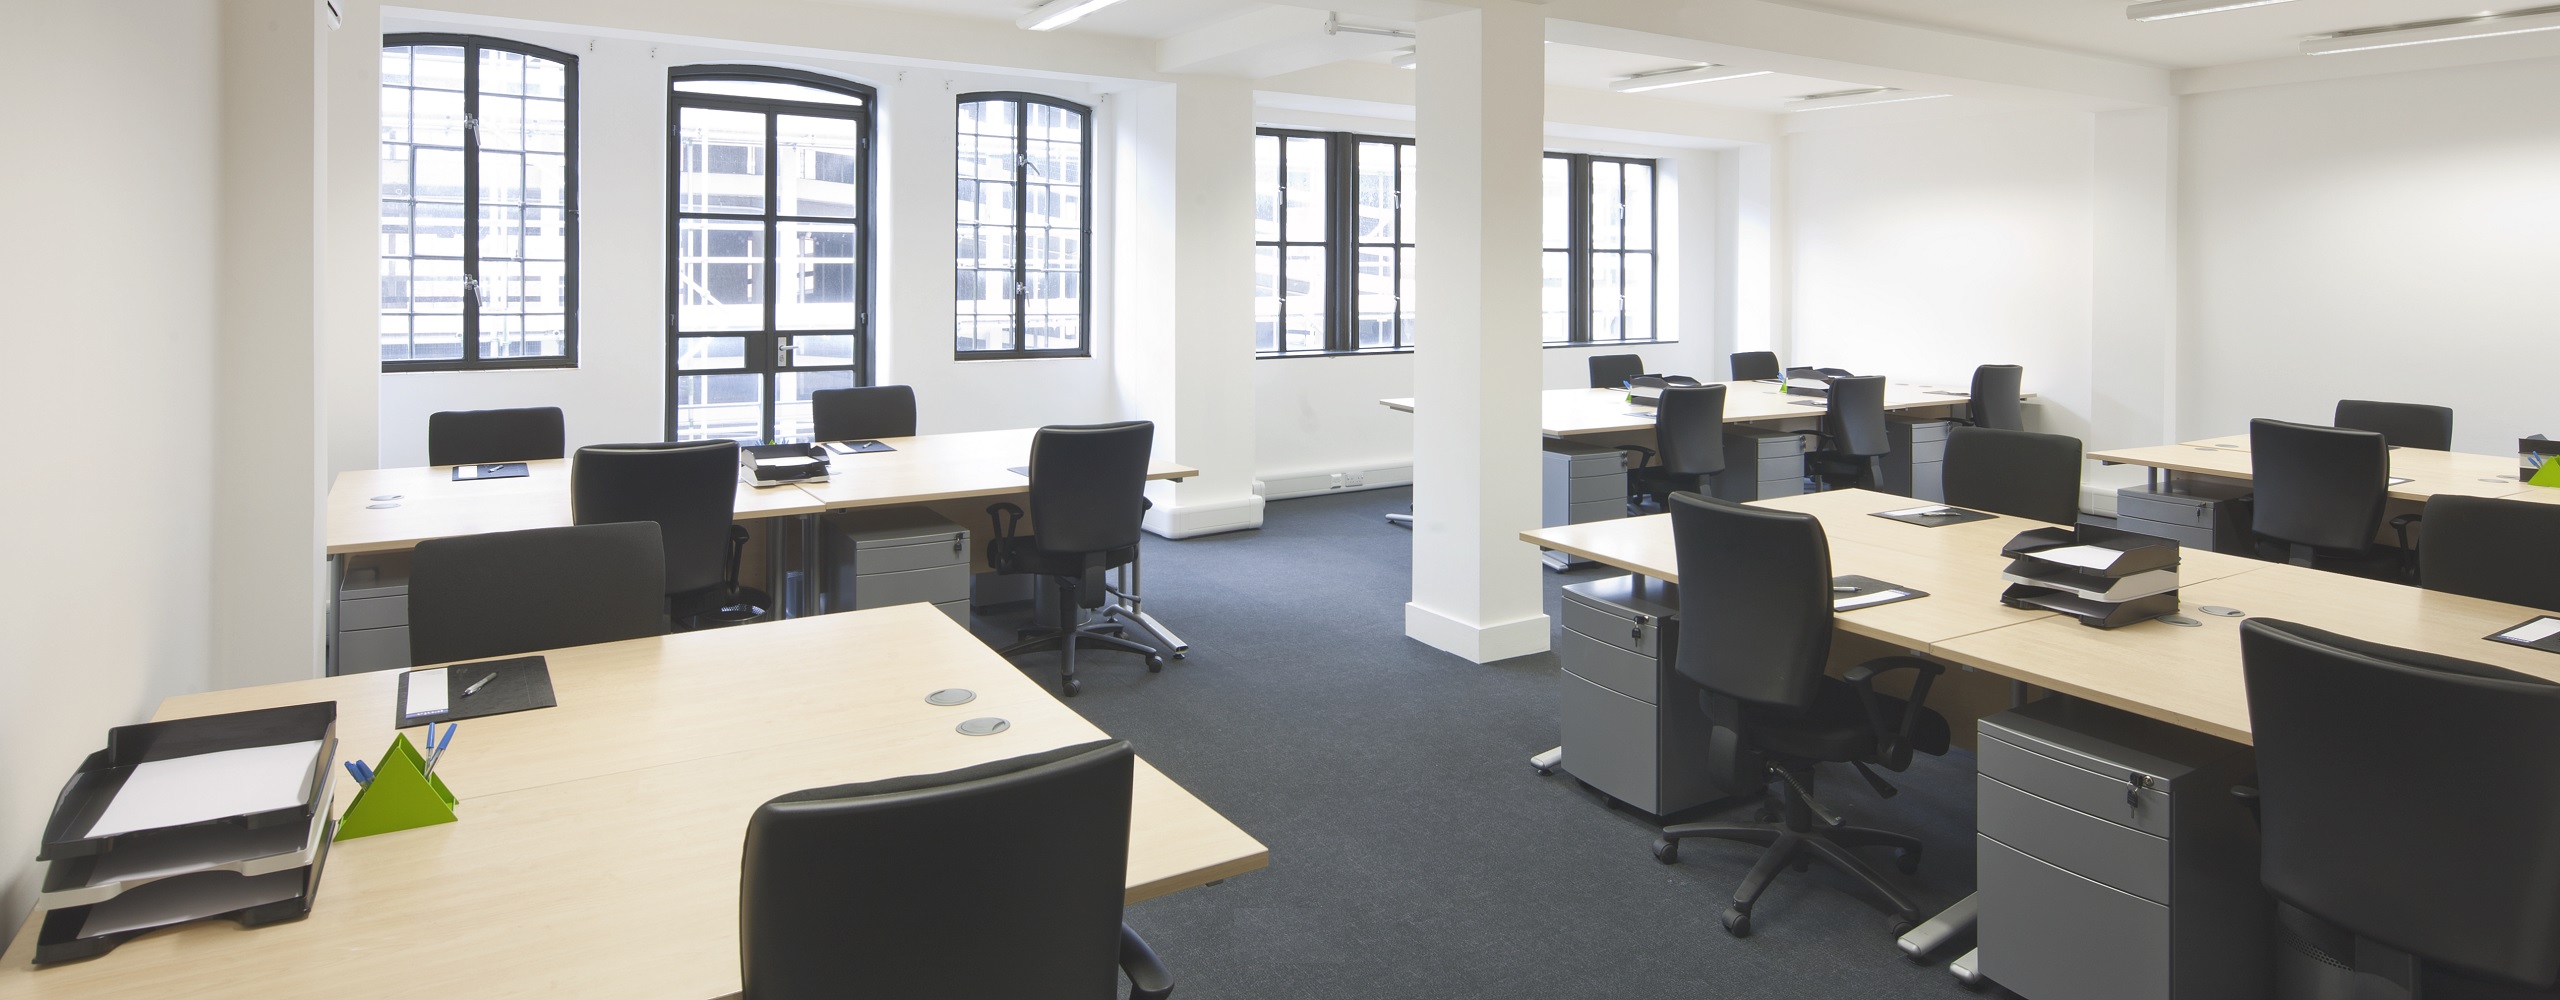 Office Space London - Business Centres - Rent Meeting Room